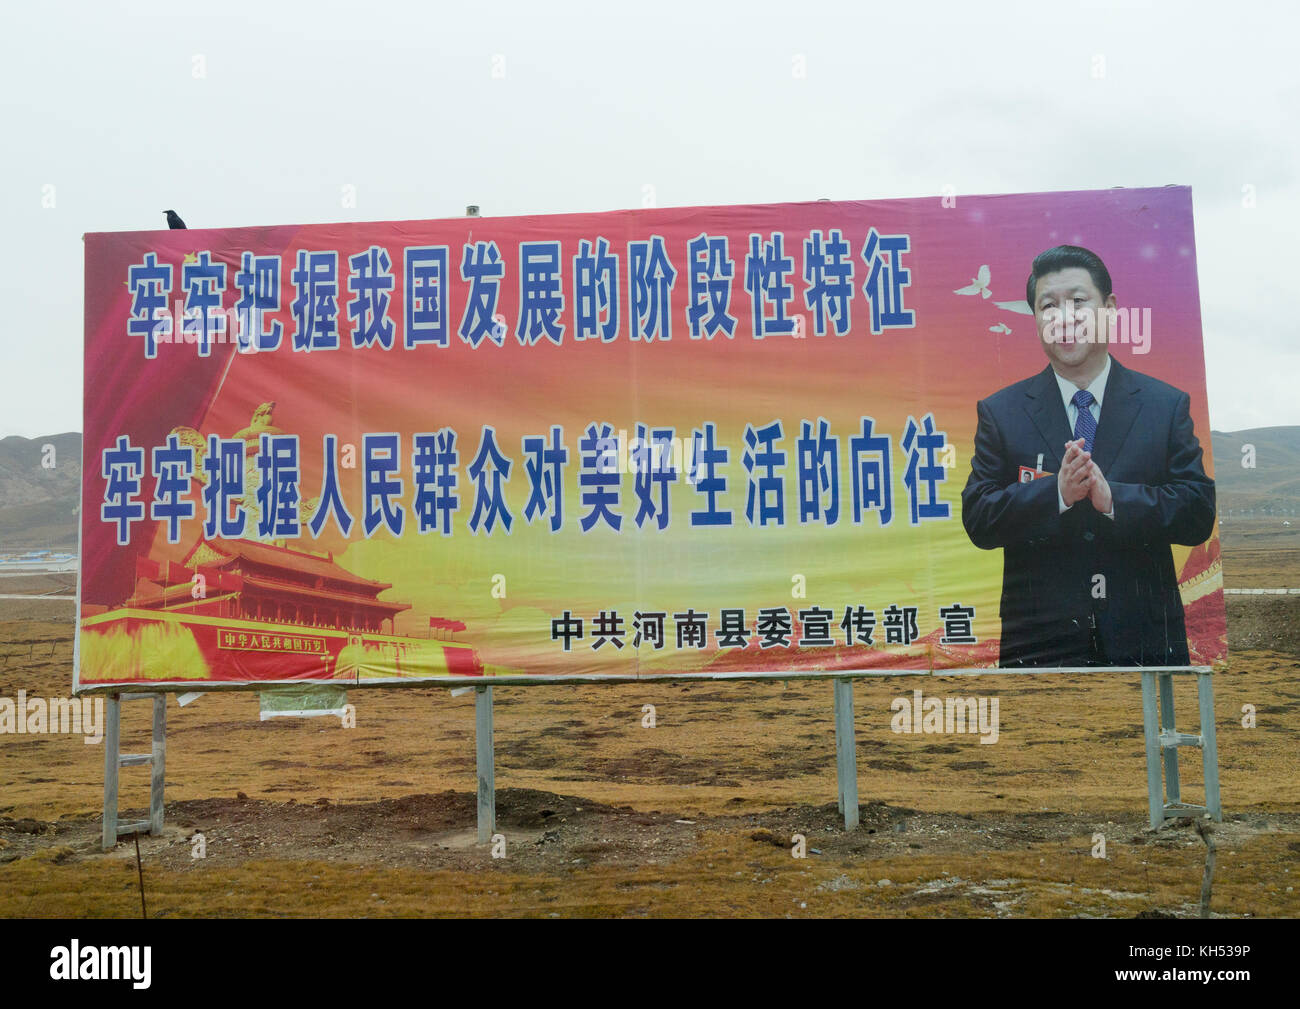 Chinese president Xi Jinping propaganda billboard about development and a good life for the people, Qinghai province, Sogzong, China Stock Photo